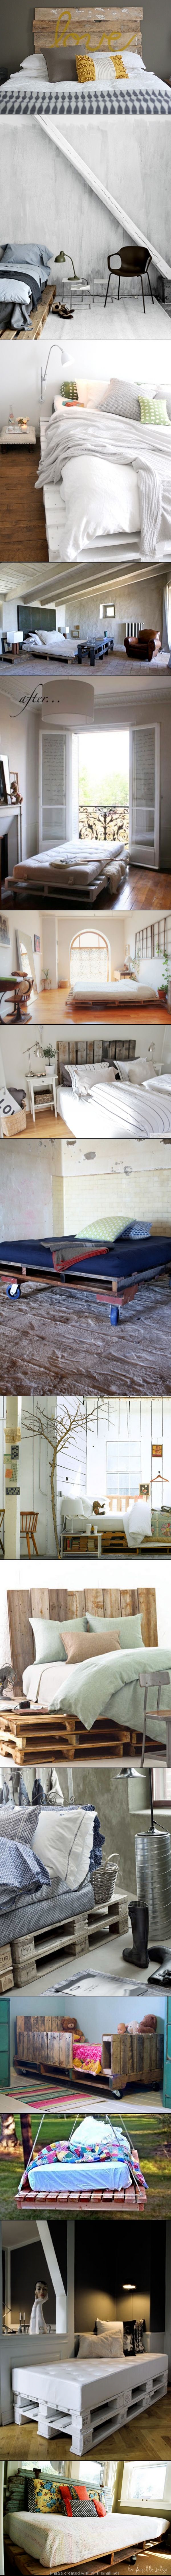 DIY DECOR AND CRAFTS: Home Decor Ideas - TOP 15 PALLET BED HACKS